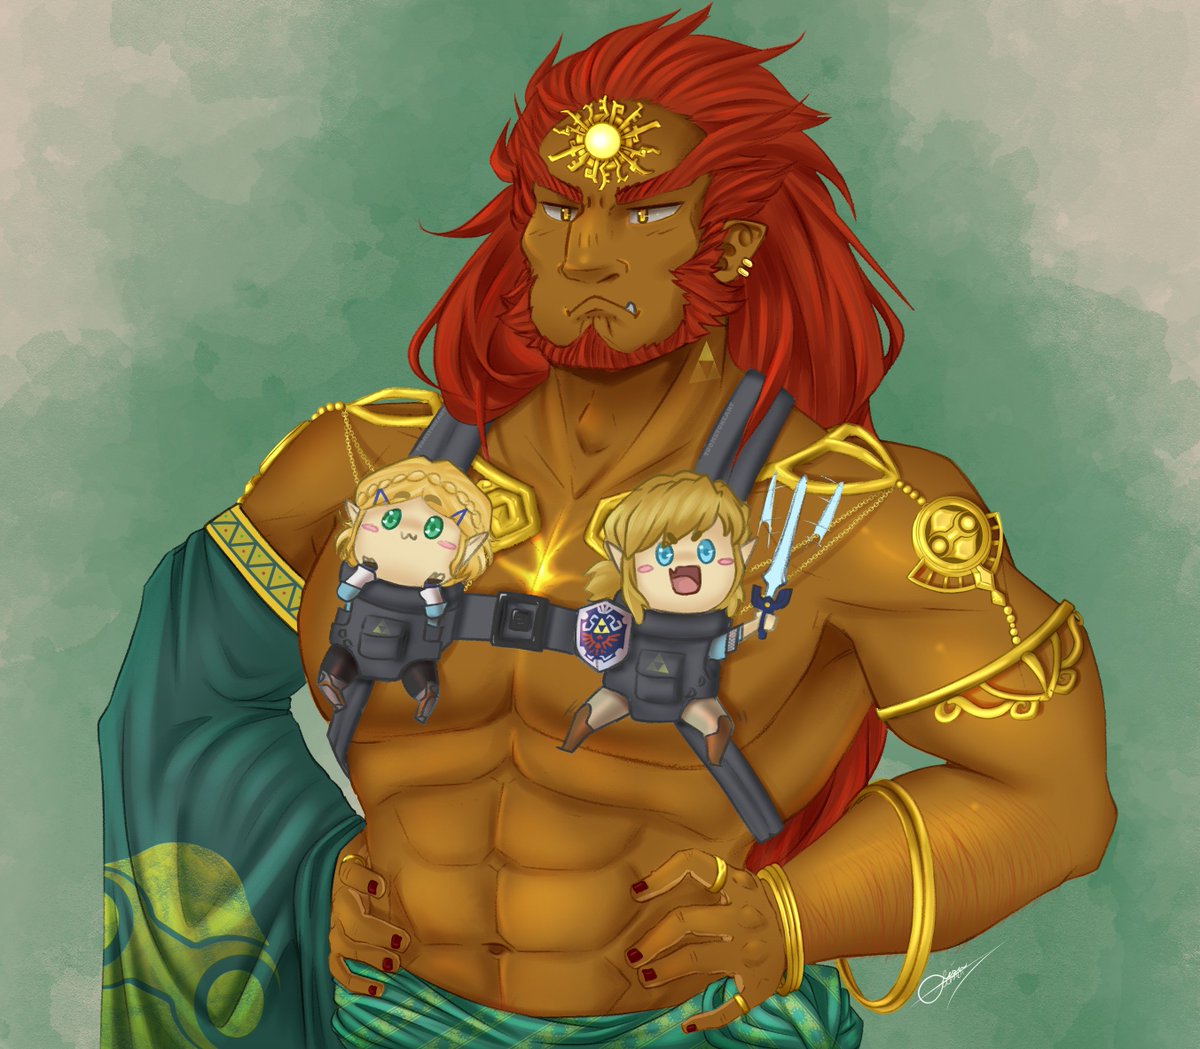 I ended up with this..I.. don't know how I got here.#loz #Ganondorf #Z...